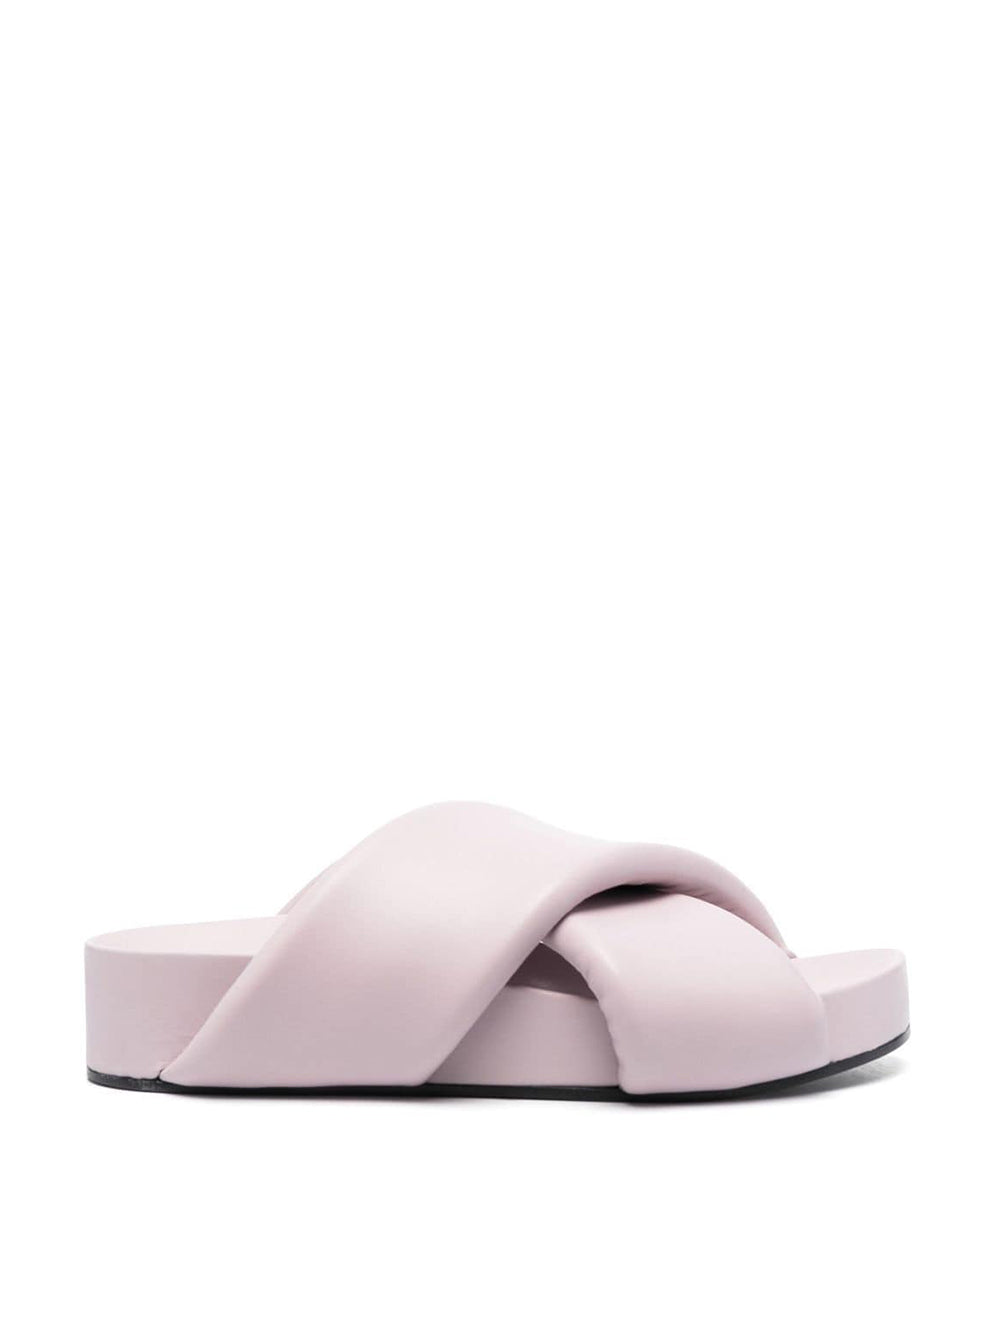 Band Sandal In Lilac Leather